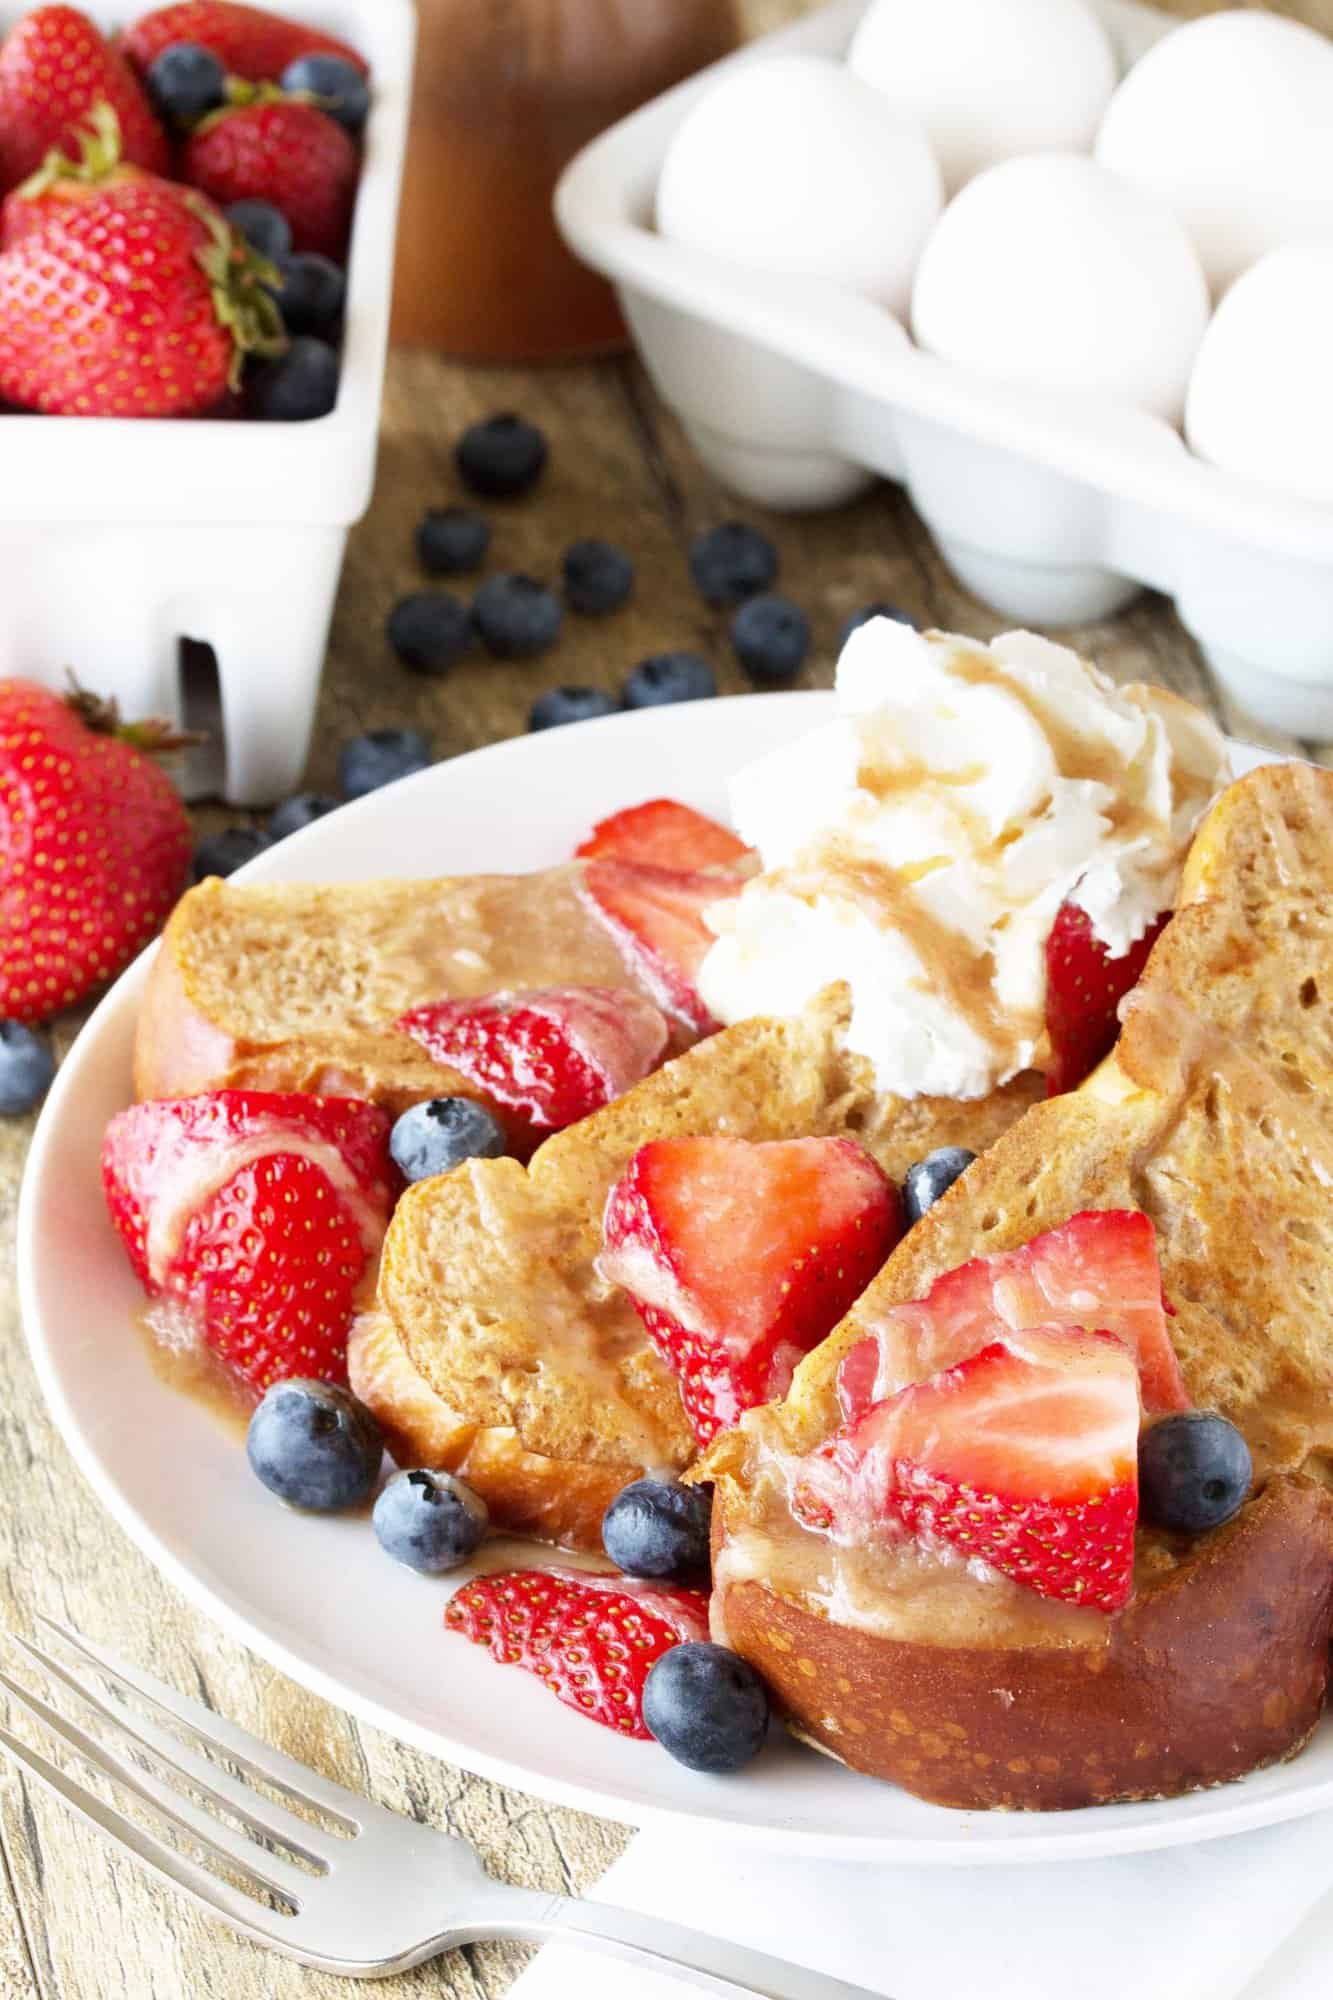 Get ready for the Best French Toast Ever! This french toast is made from challah bread and it's freezable too so you can enjoy a gourmet french toast breakfast any day of the week!